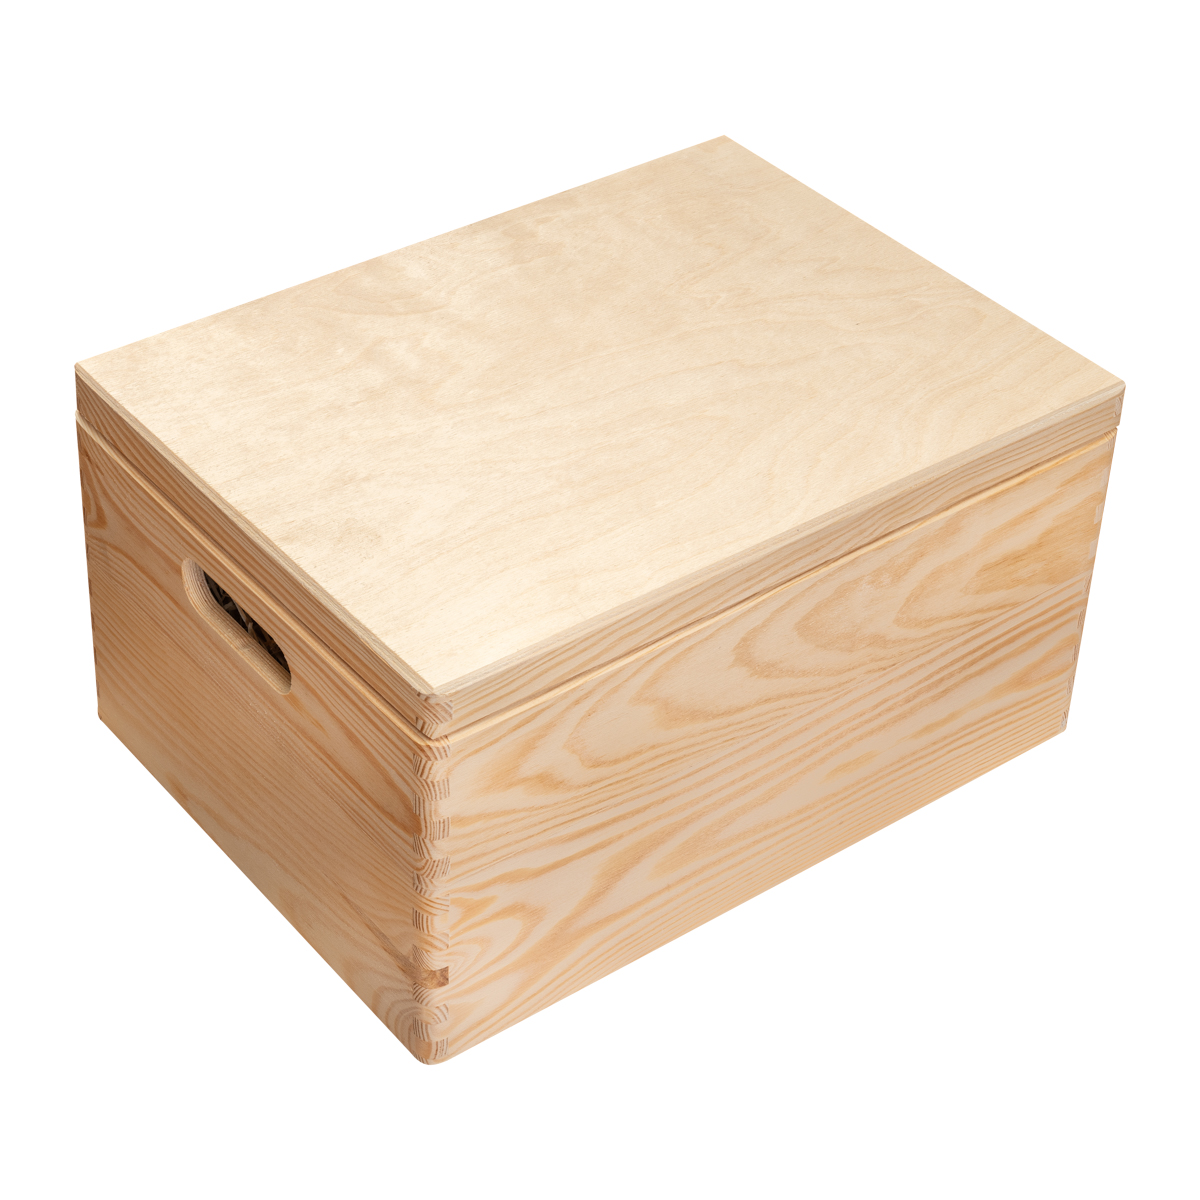 Glossy Lamination Durable And Sturdy Material Recyclable Wood Wedding Gift  For Packaging Box at Best Price in Pune | Kwality Instruments Box Co.